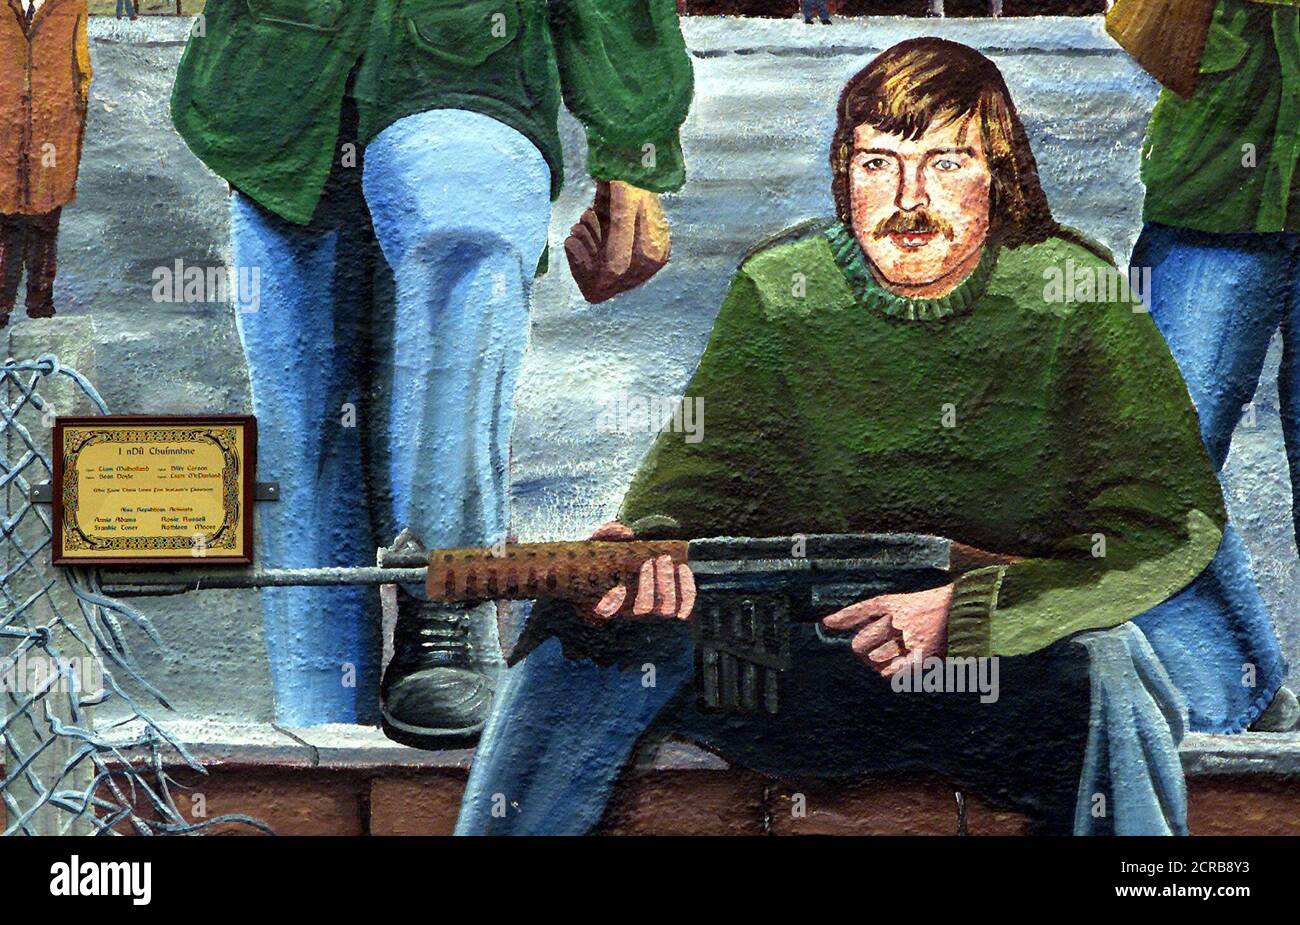 New colourful Irish Republican murals drawn on the walls of Ballymurphy, west Belfast, Northern Ireland, 10 August, 2002. The murals show IRA volunteers patroling the west Belfast streets during the troubles carry weapons. REUTERS/Paul McErlane  PM Stock Photo